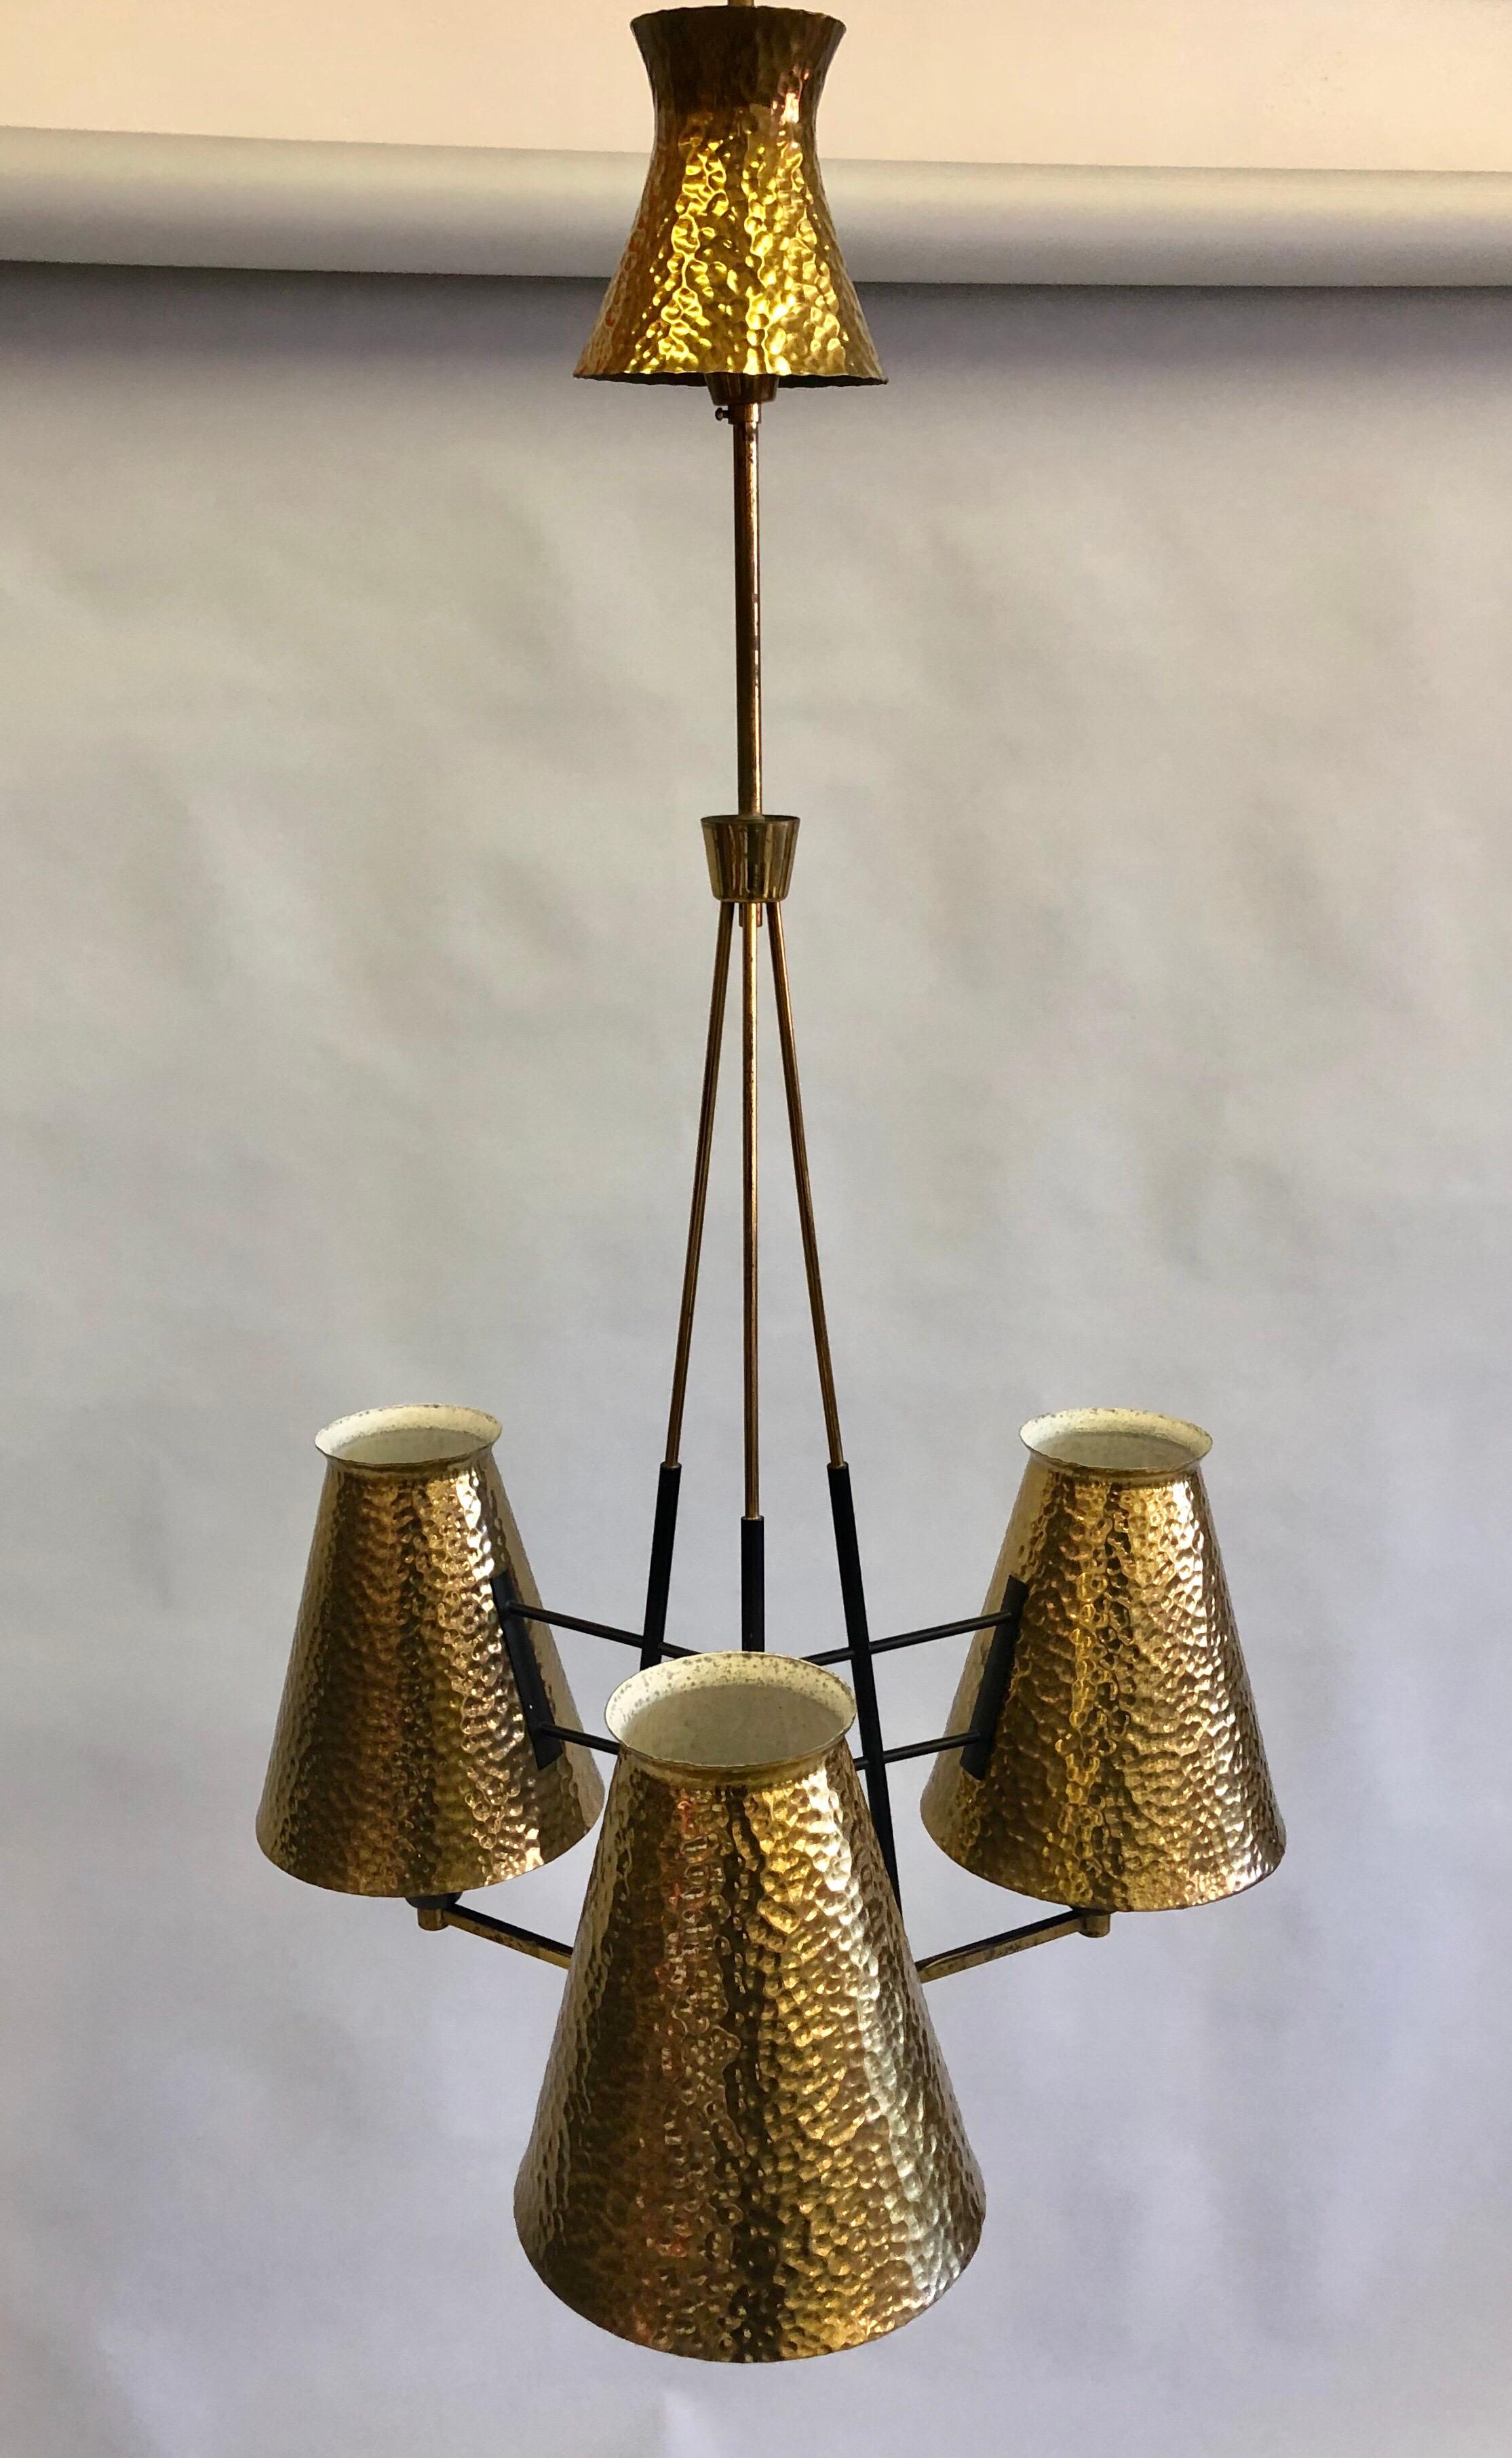 Italian Midcentury Hammered Brass and Black Metal Chandelier by Stilnovo In Good Condition For Sale In New York, NY